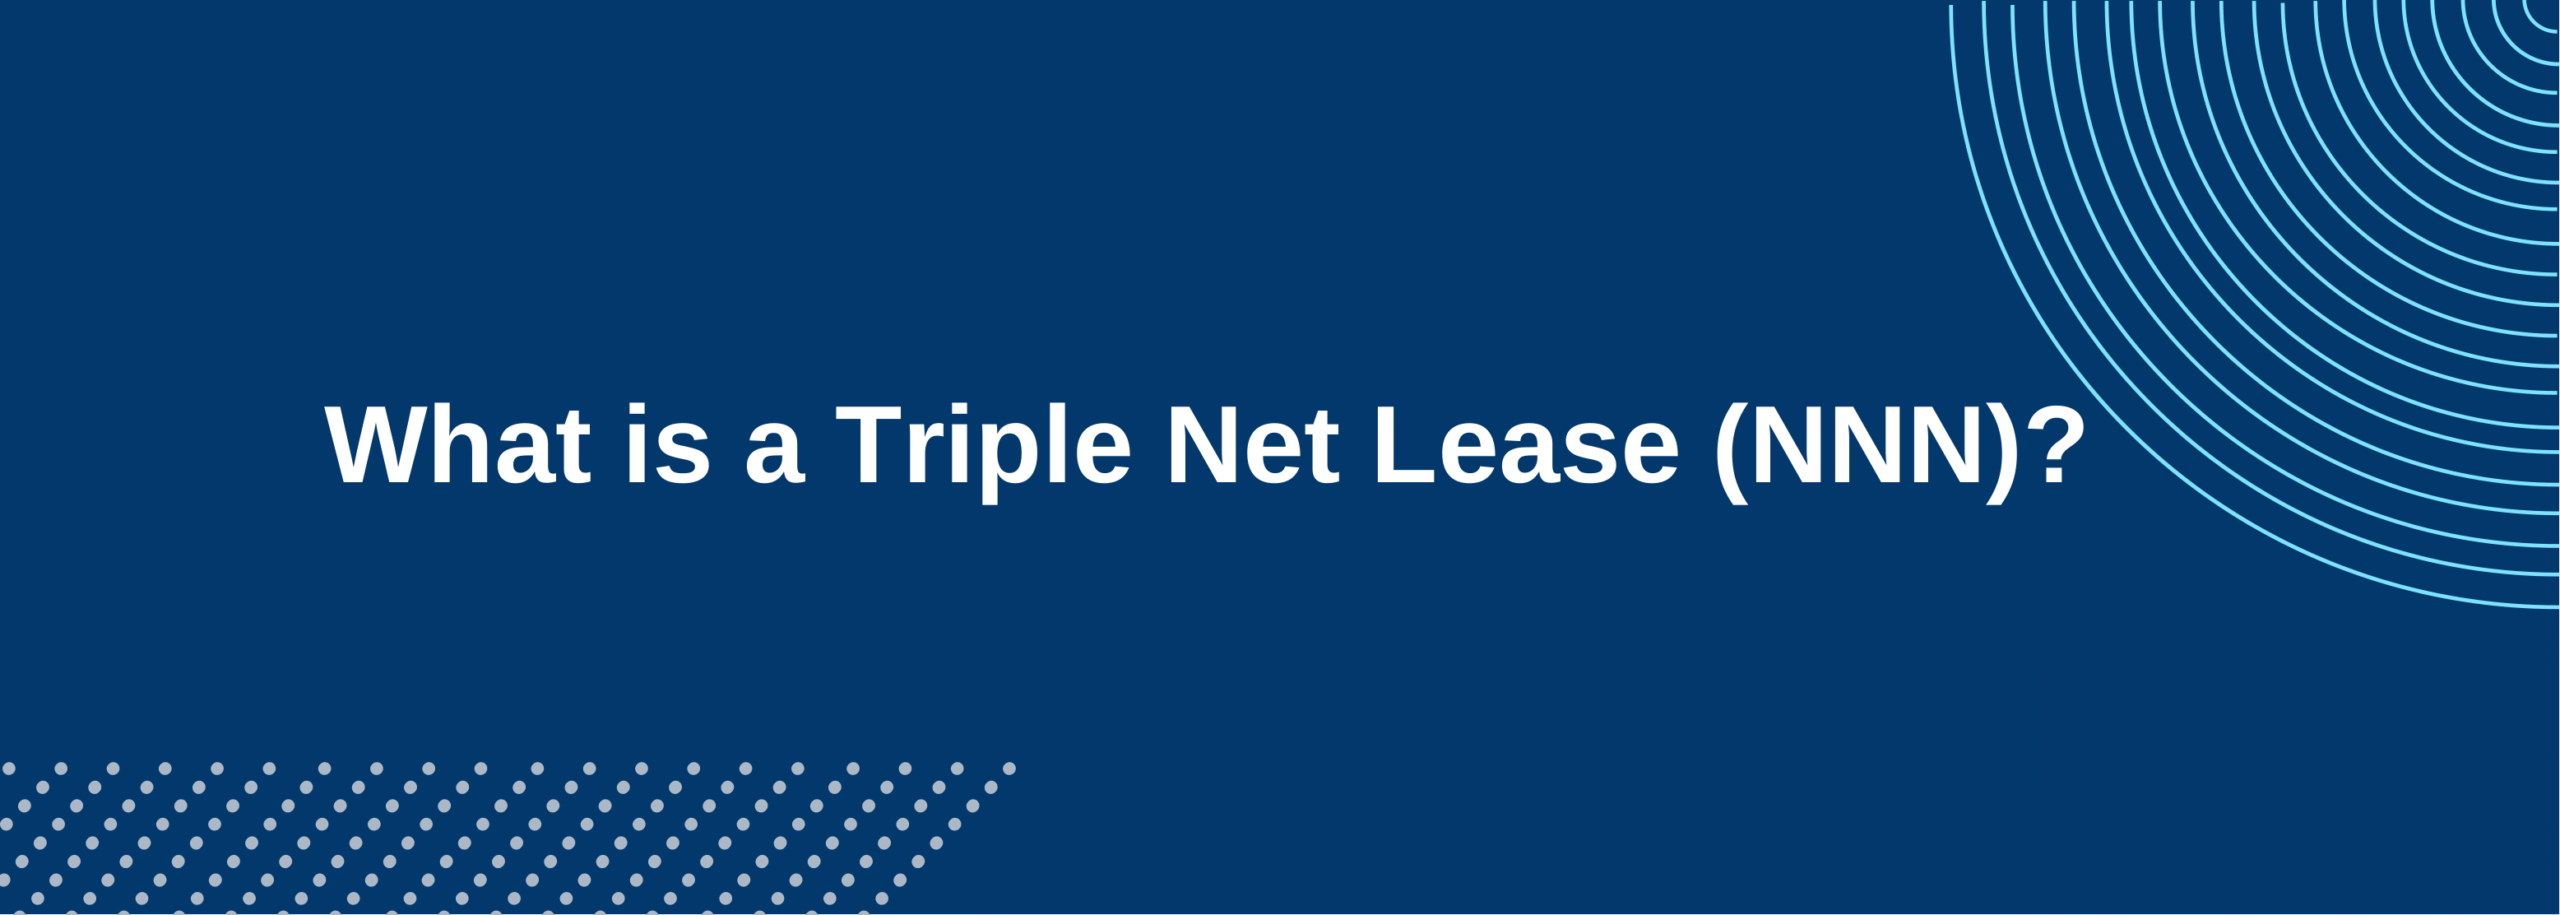 A triple net lease is a commercial real estate lease agreement in which the tenant pays the real estate taxes, insurance premiums, and maintenance in addition to the cost of rent and utilities.